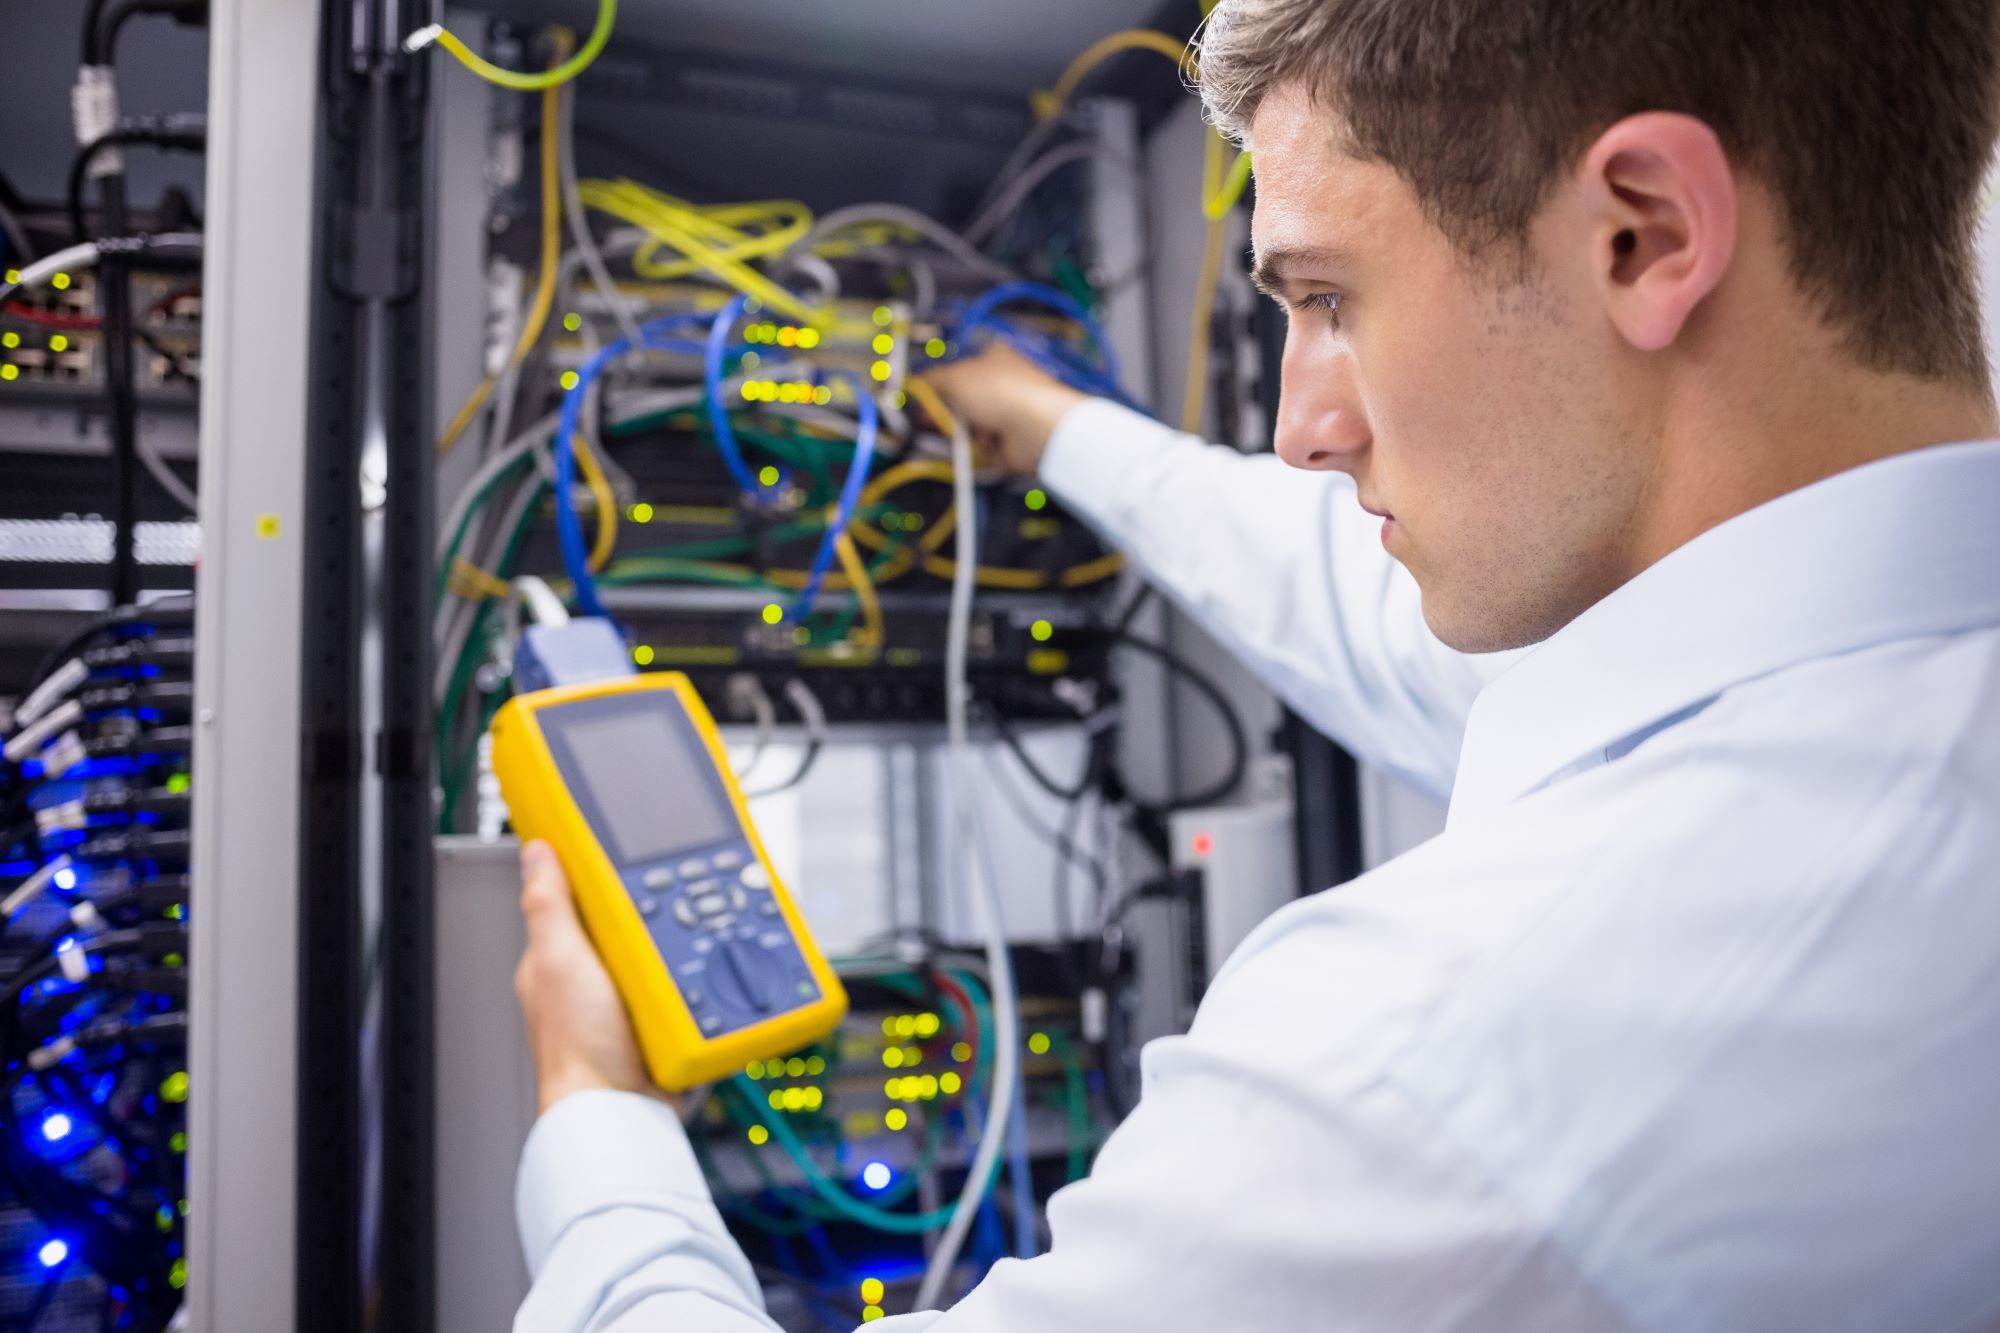 A team of technicians works on providing managed services solutions